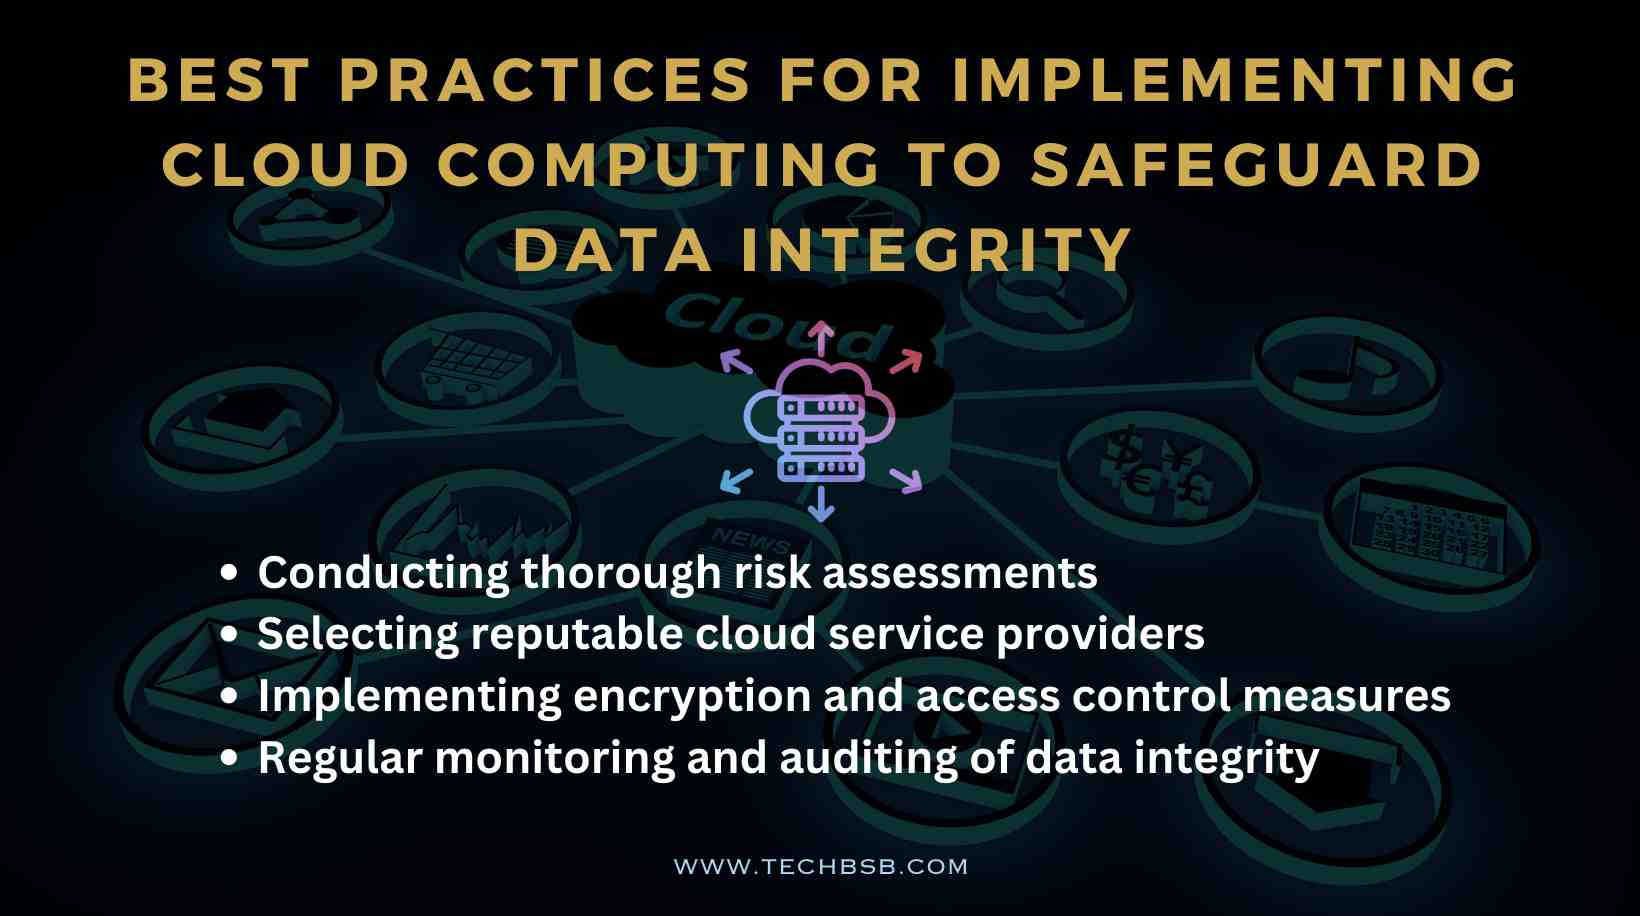 Conducting thorough risk assessments B. Selecting reputable cloud service providers C. Implementing encryption and access control measures D. Regular monitoring and auditing of data integrity